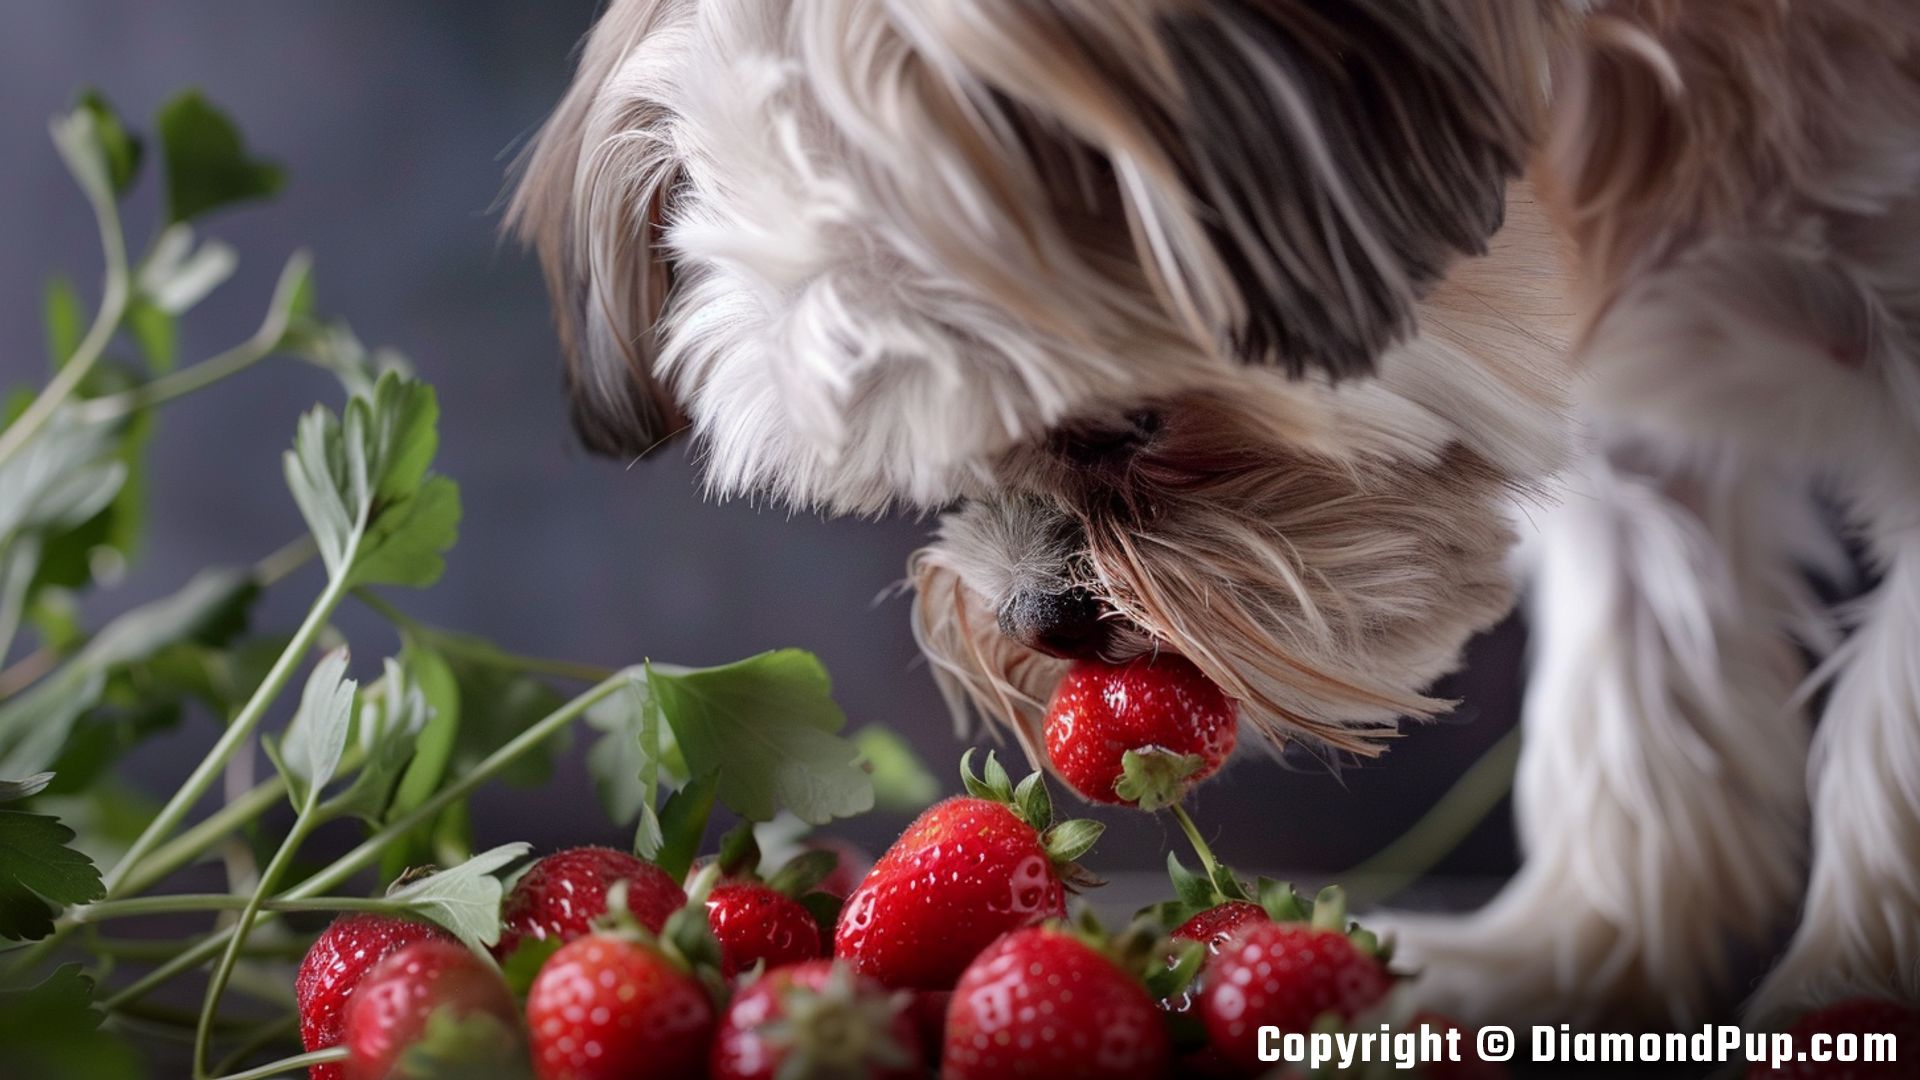 Photograph of Shih Tzu Snacking on Strawberries